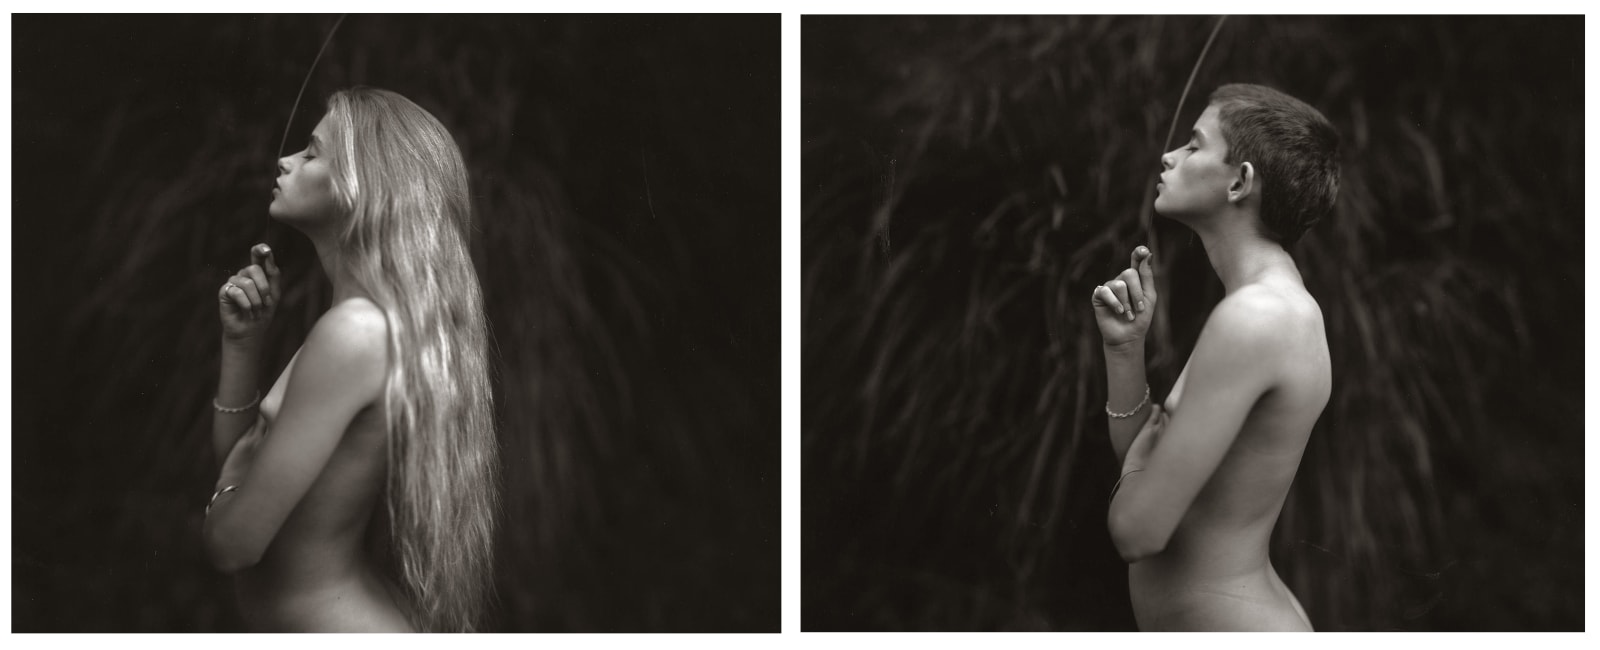 Jessie at 12 diptych, first with long hair before haircut and next with short hair after haircut, from the Immediate Family series by Sally Mann